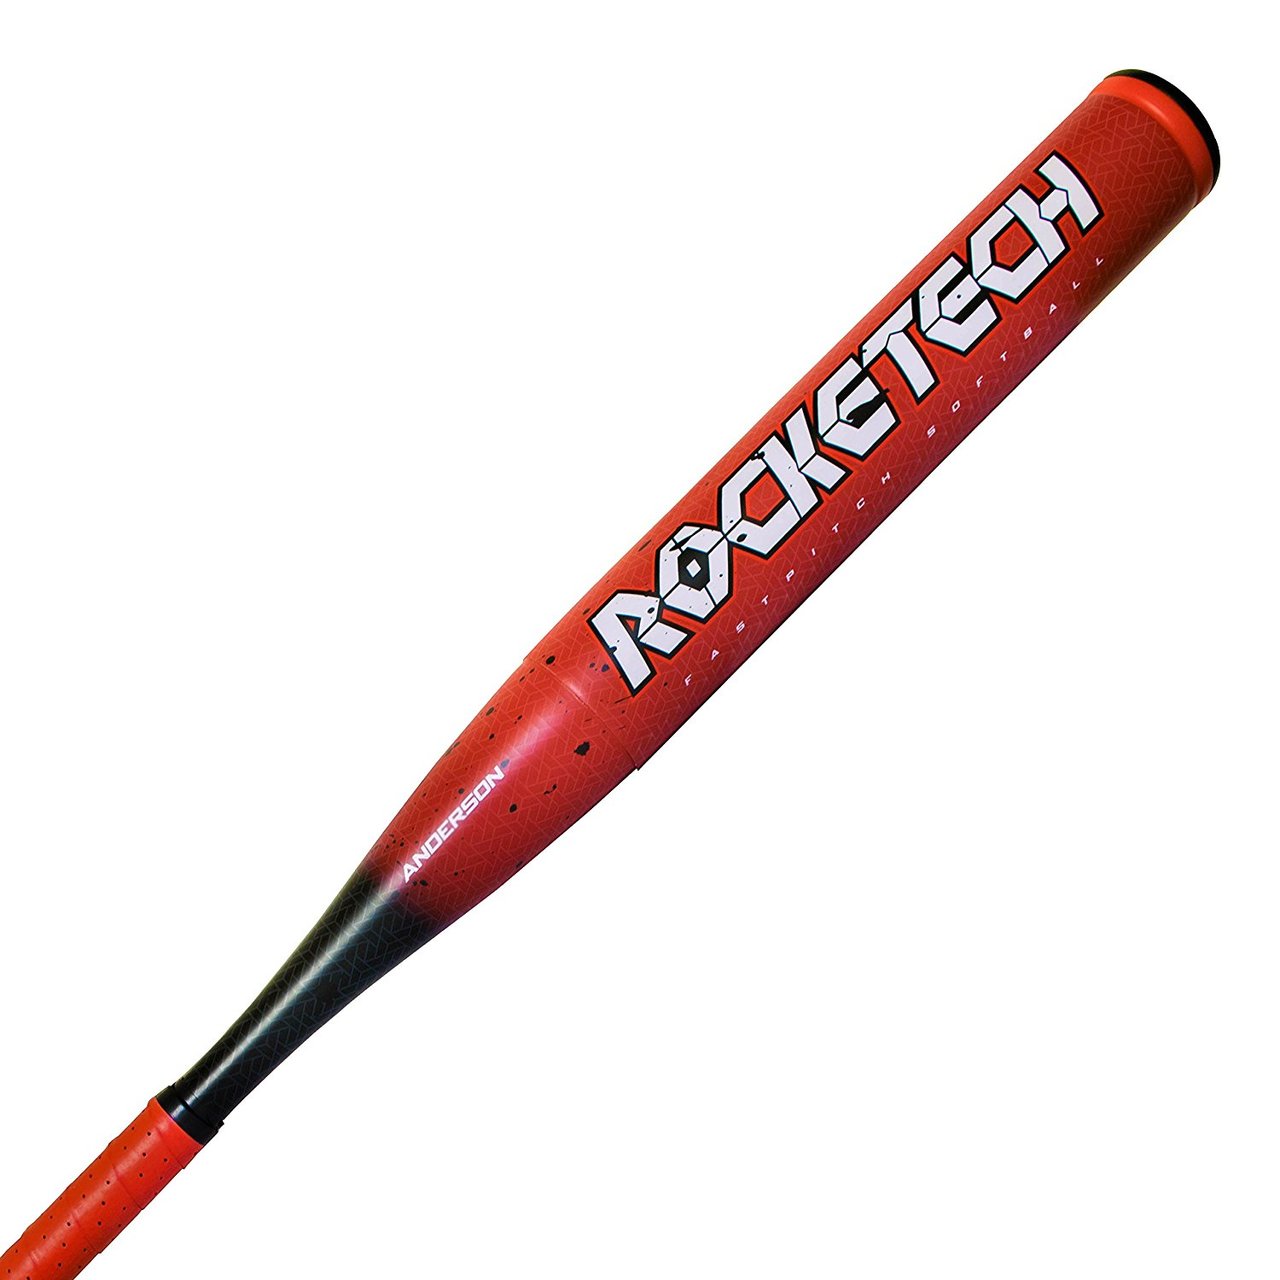 The 2018 Rocketech -9 Fast Pitch Softball Bat is Virtually Bulletproof!    Constructed from our Aerospace Alloy, the power arch technology, multi-wall design is considered one of our most durable bats so you’ll never worry about your new RocketTech 2.0 denting or cracking in the middle of a season or for that matter any season as the Rocketech 2.0 is an ALL season bat.  Don’t let the cold stop you from dropping bombs on the competition.    We packed as much mass and muscle into the double wall barrel to deliver bone crushing hits into the ball… you’ll notice how quickly and effortlessly the ball will spring off the barrel. Ultra-Thin Whip Handle for better bat speed • 2 ¼” Barrel • -9 Drop Weight • End Loaded for more POWER, guaranteed! • Hot out of the wrapper, no “break-in” period necessary • Strengthened light weight end cap provides barrel support and performance • Power Arch Multi-Wall Technology provides second to none exit speed on contact • Meets BPF 1.20 Standards • Approved By All Major Softball Associations Including: ASA, USSSA, NCAA, NSA, and ISA • Manufactures Warranty: 1 Year against manufacture defects • Model #: 017034